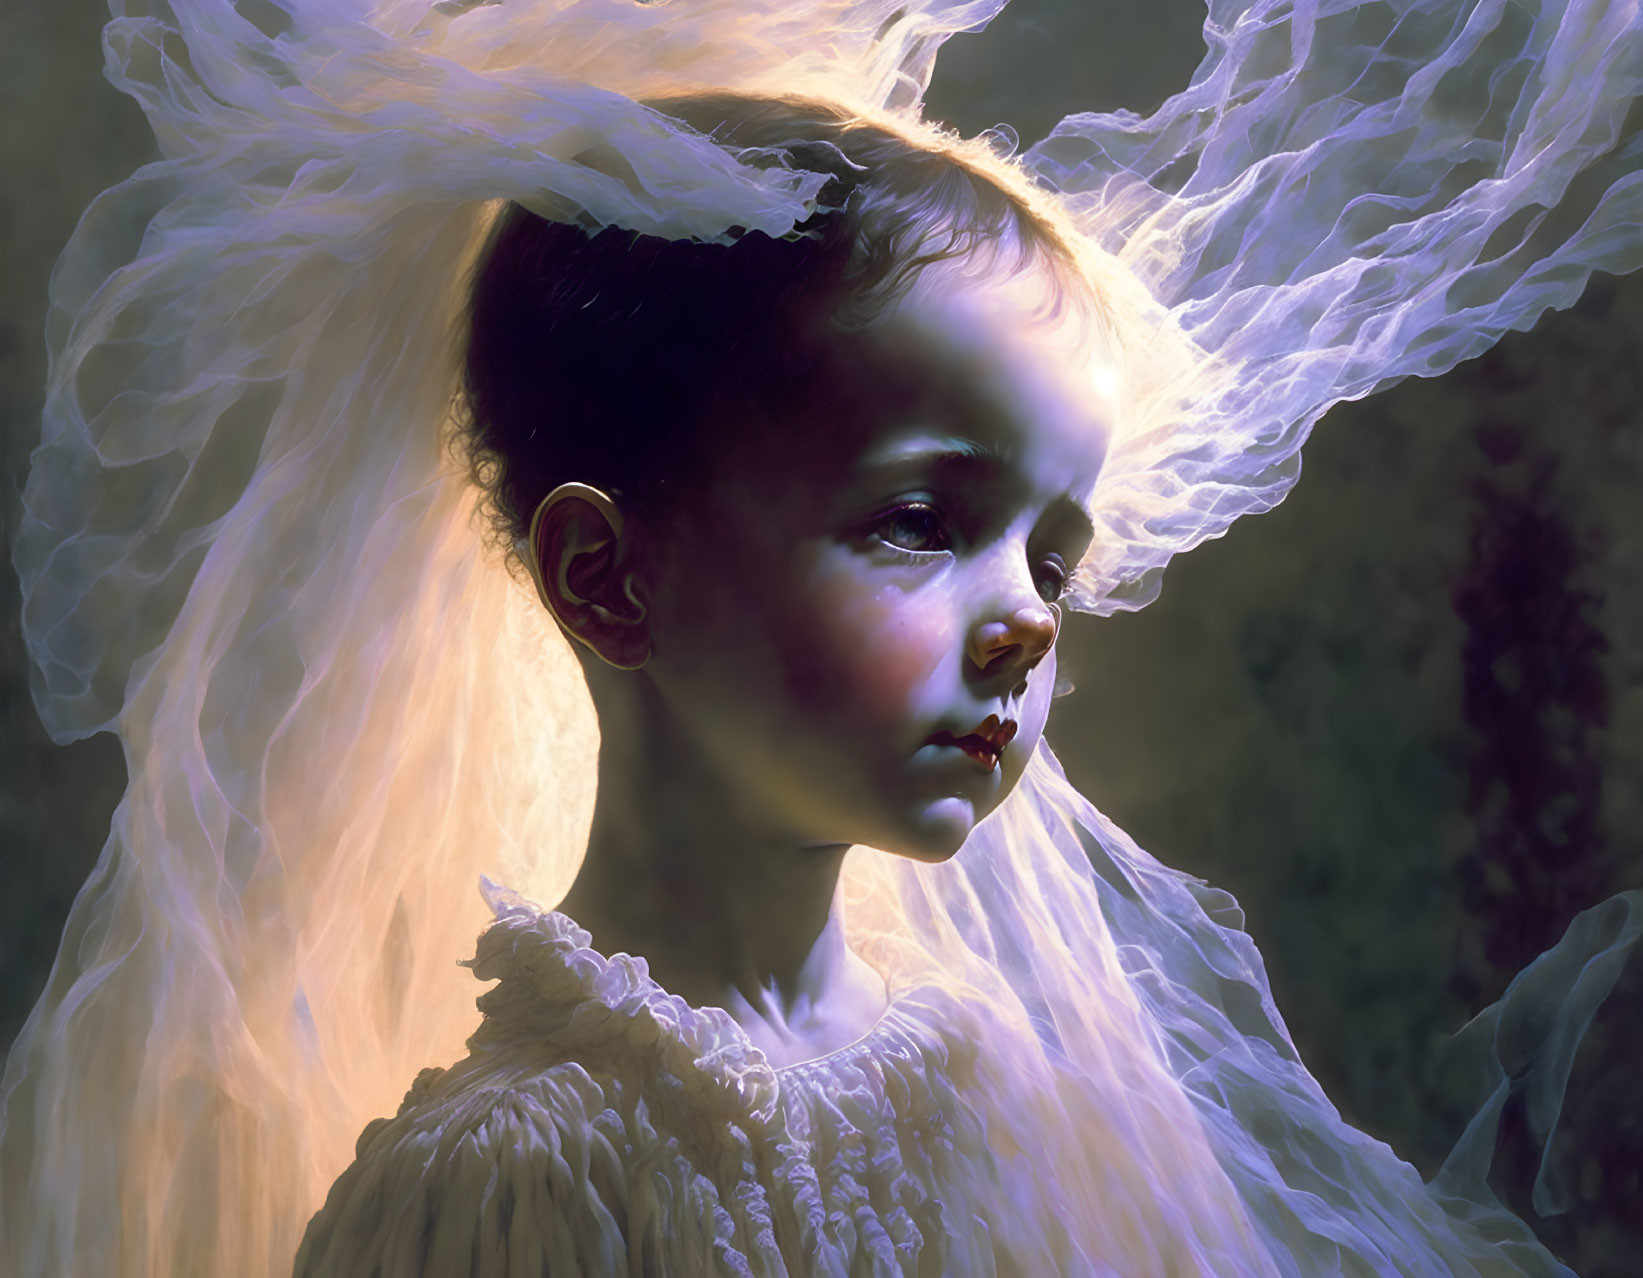 Young girl with delicate features in ethereal glow with dynamic hair wisps in dark setting